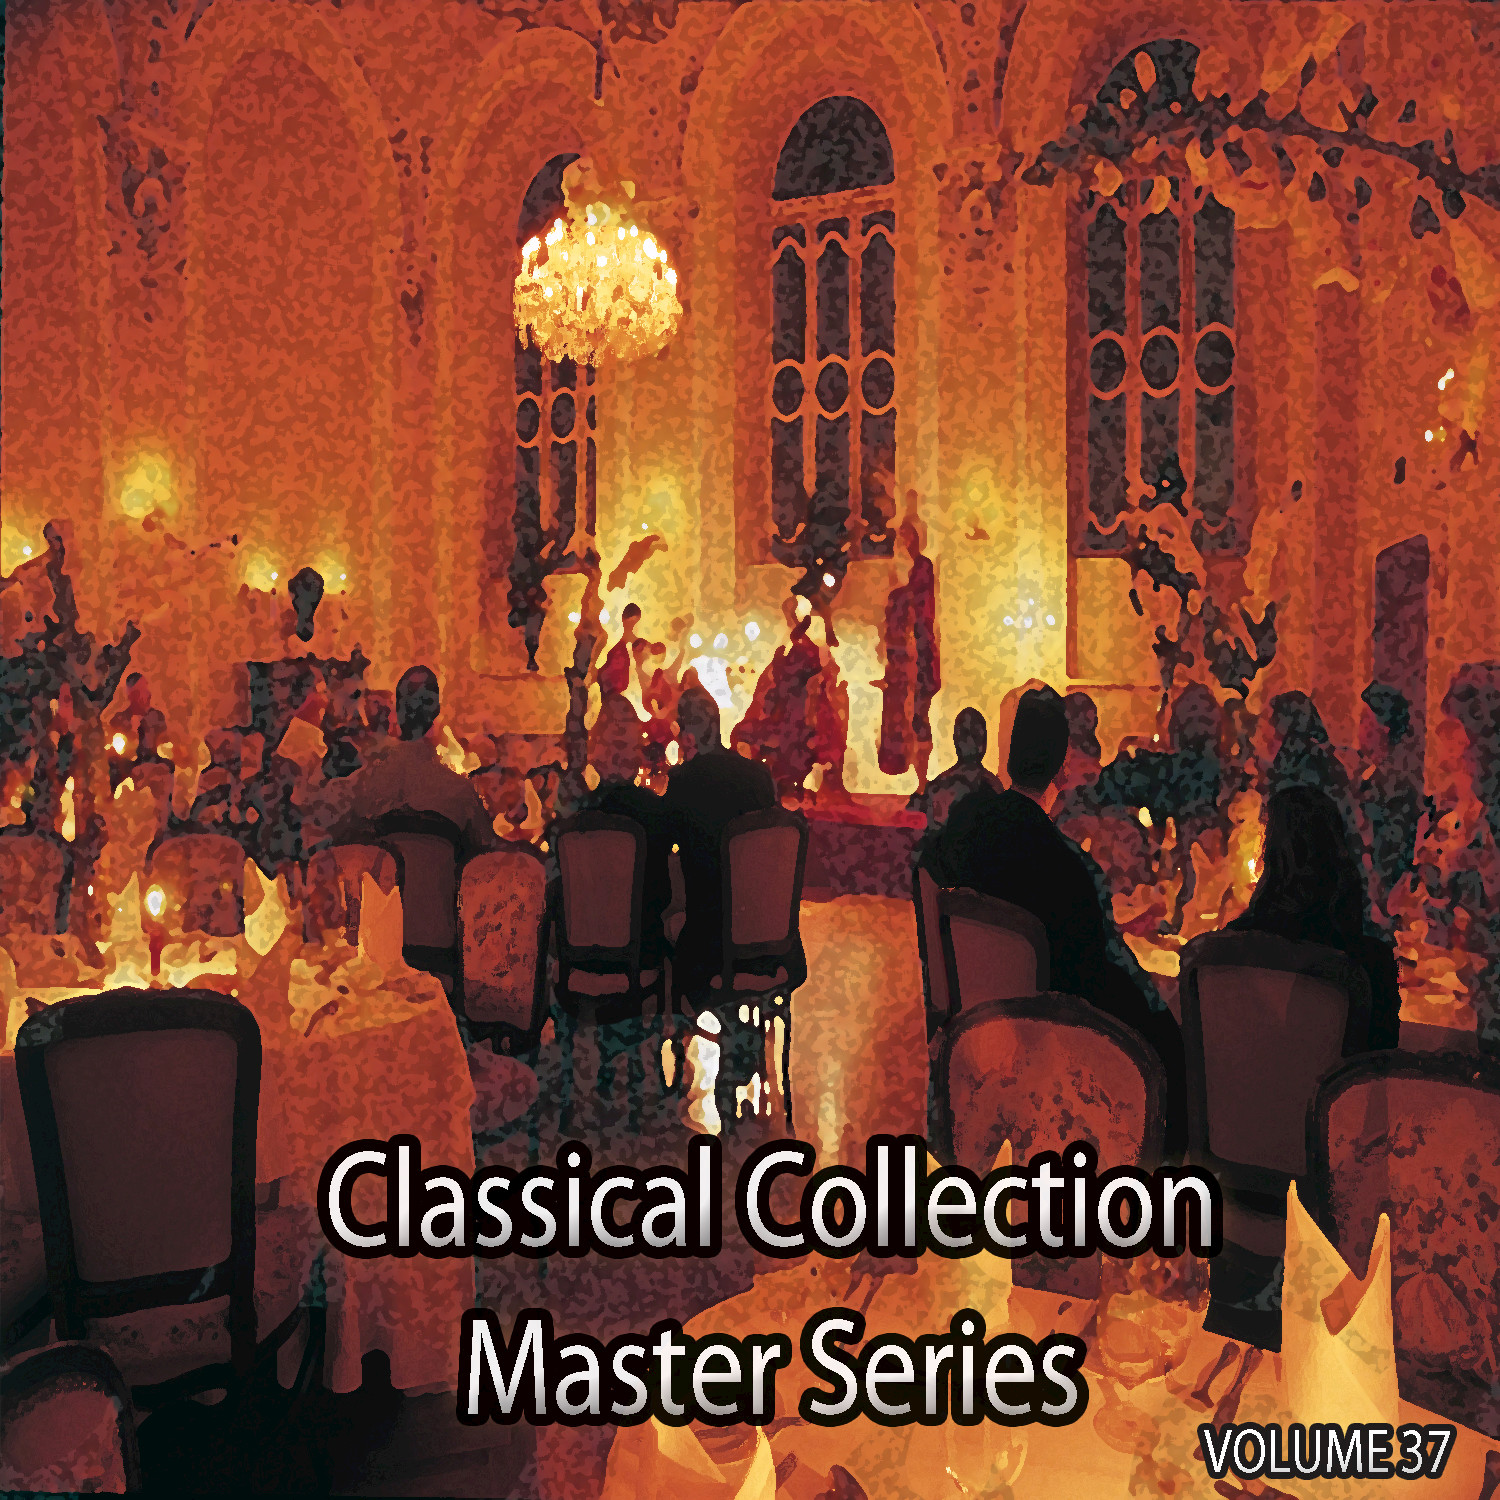 Variations on a Rococo Theme in A for Cello and Orchestra, Op. 33: Pt. 4